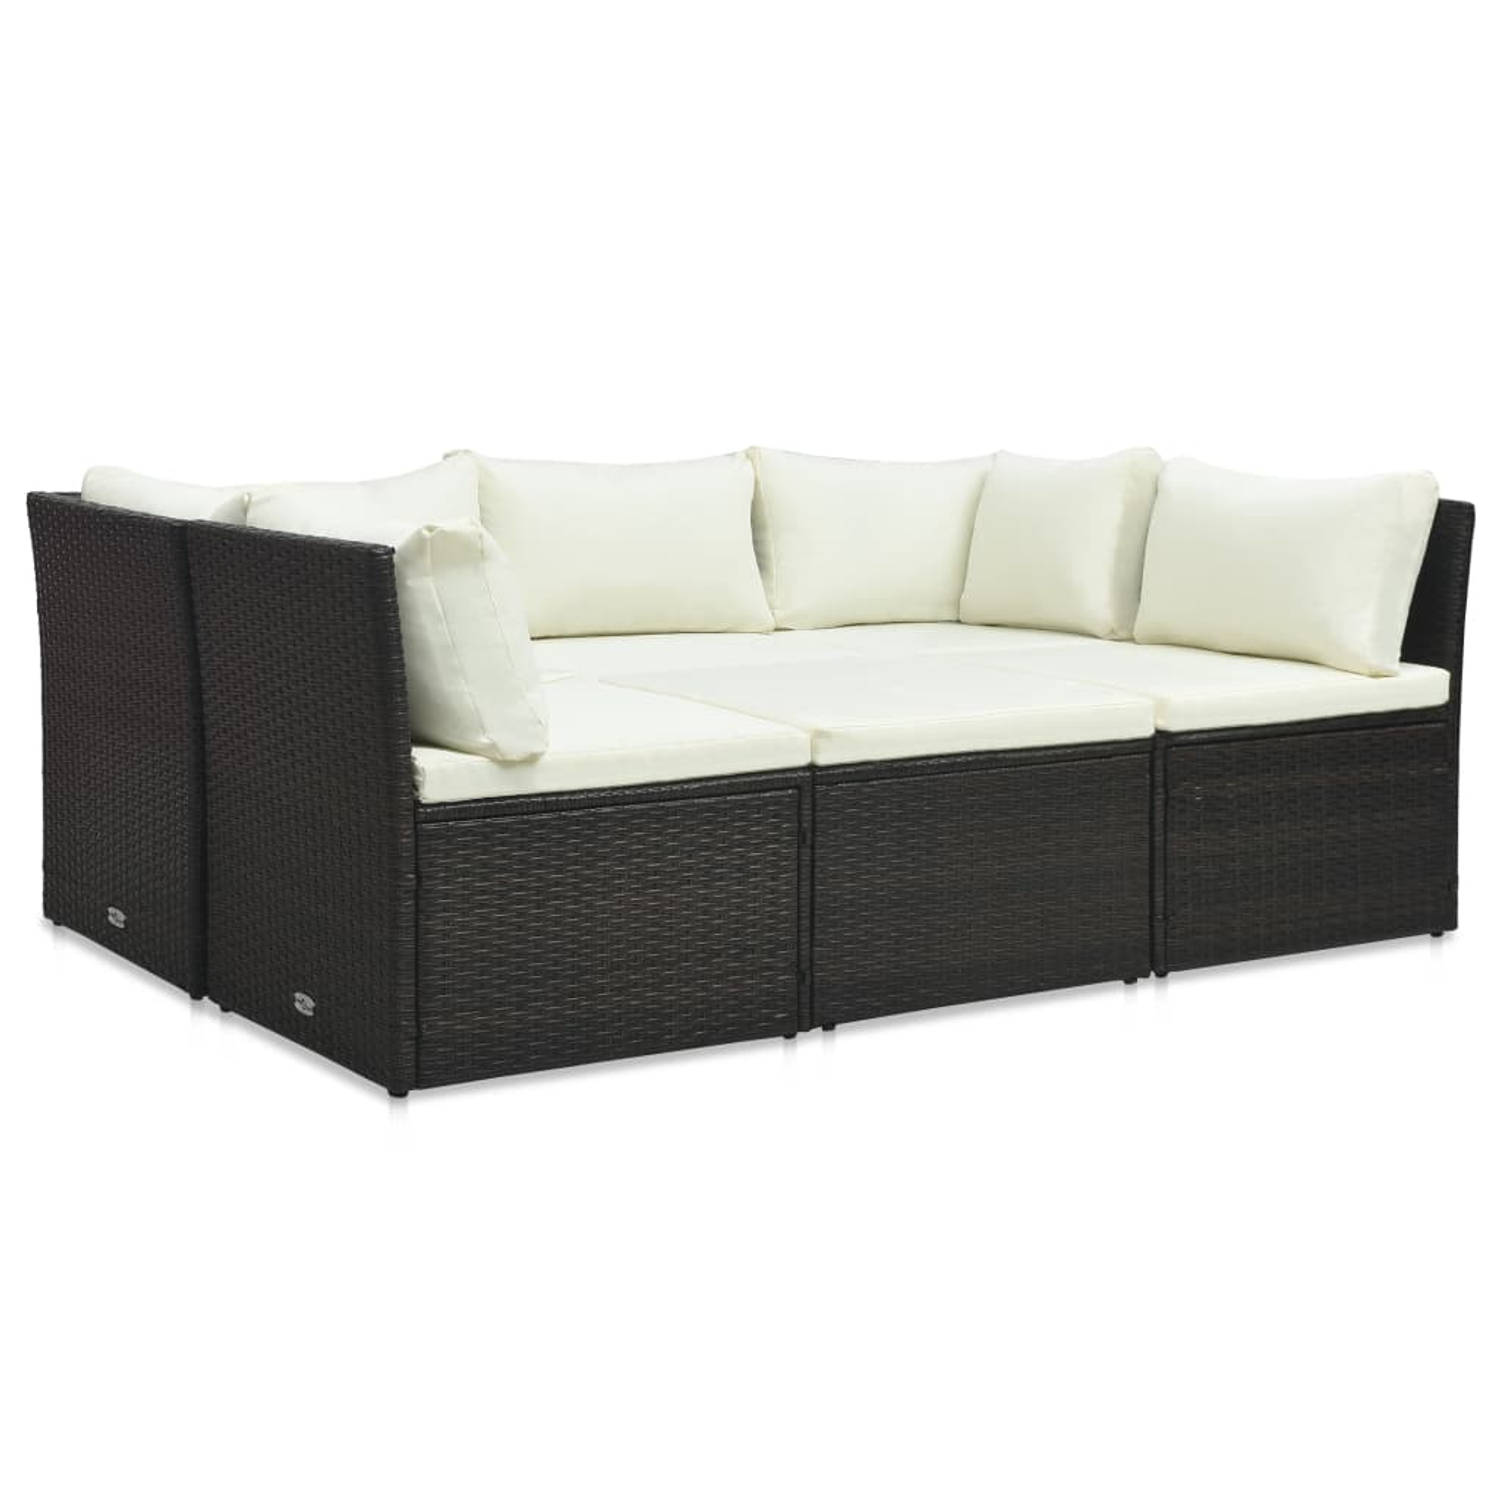 The Living Store Loungeset - Poly rattan - Bruin-Wit - 180x63x66 cm - Inclusief kussens